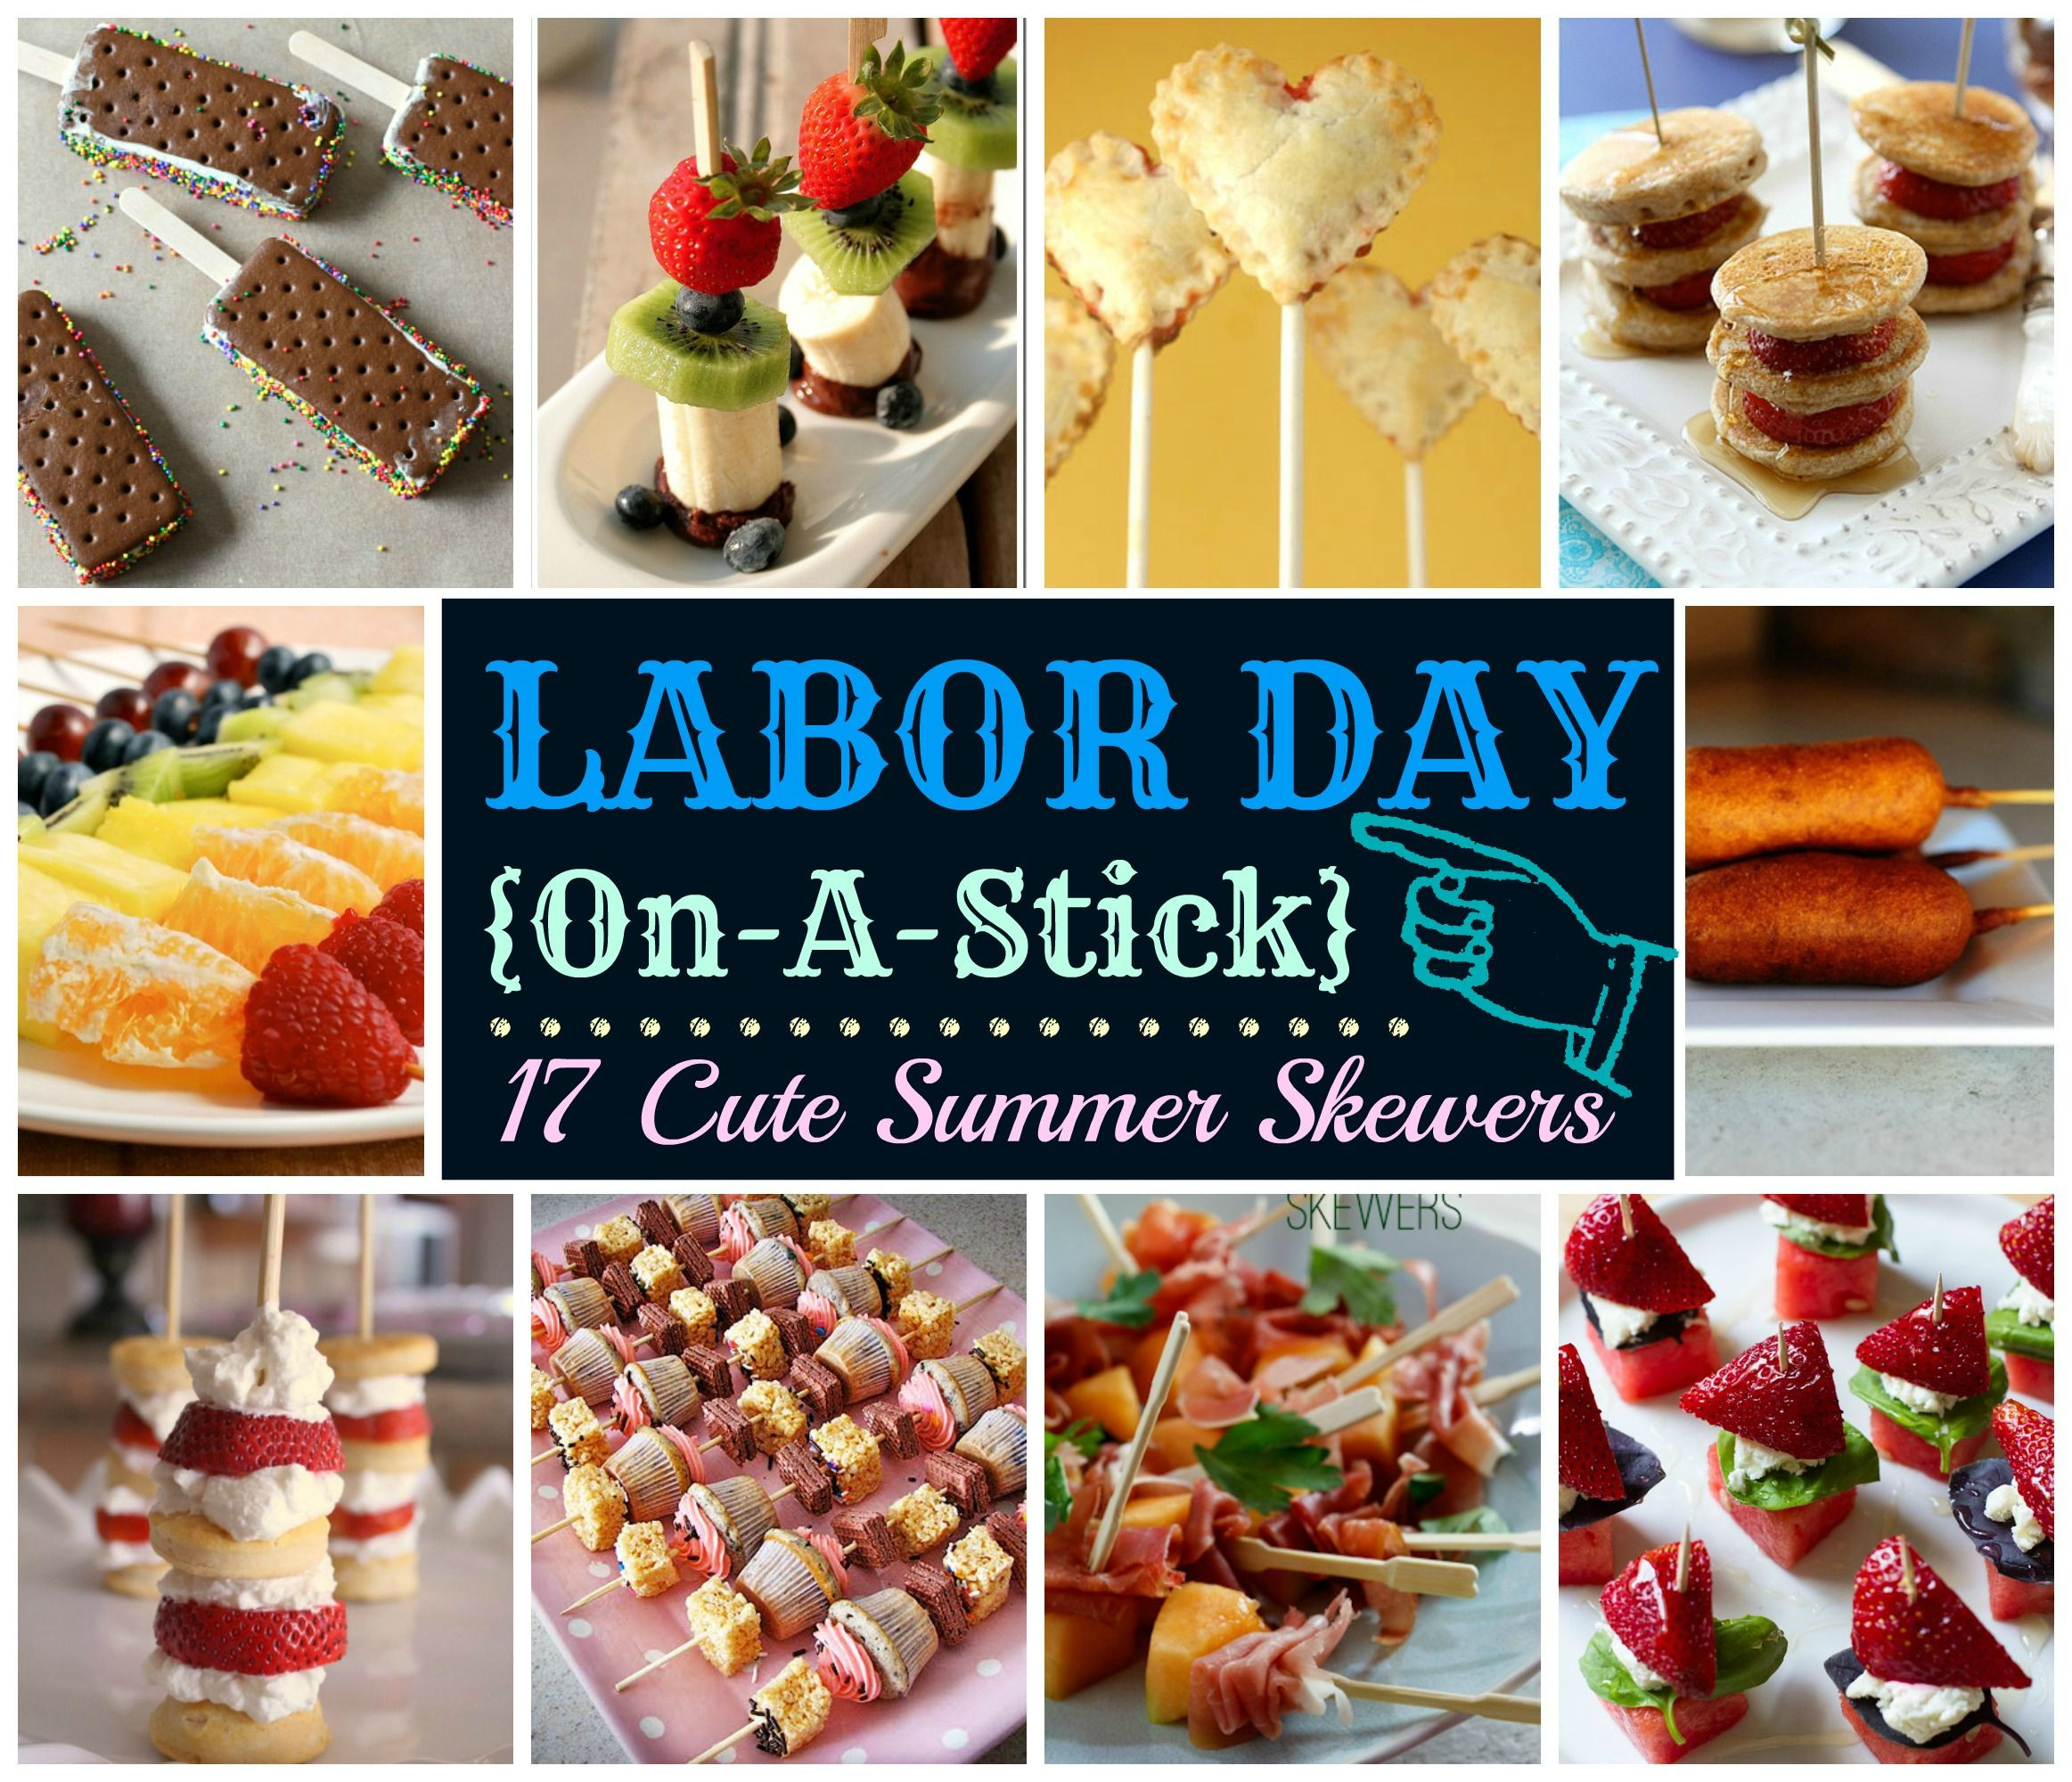 Labor Day Food Ideas
 Labor Day A Stick 17 Cute Summer Skewers